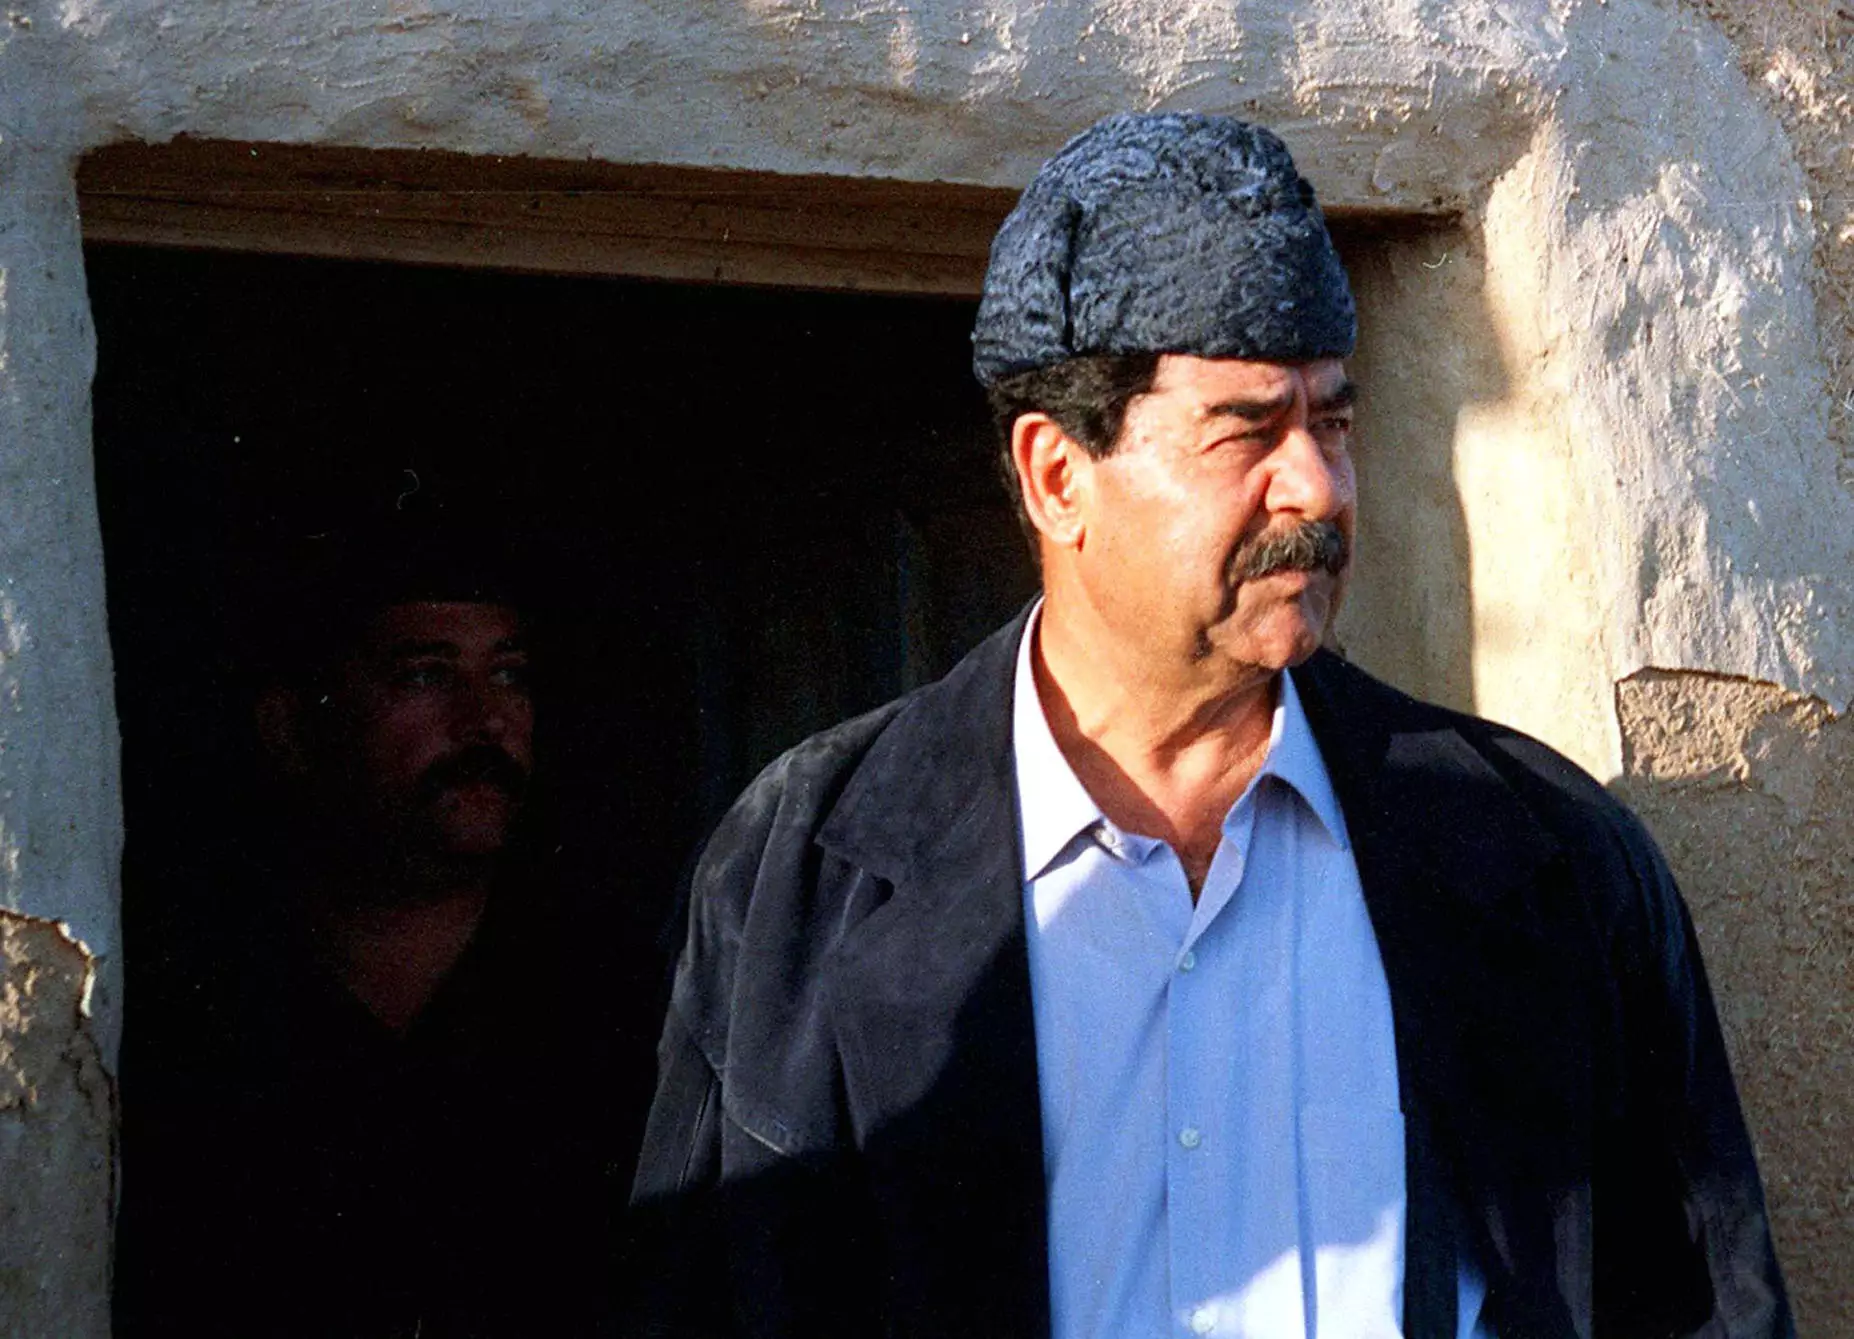 Saddam Hussein served as the fifth president of Iraq from 1979 until 2003.